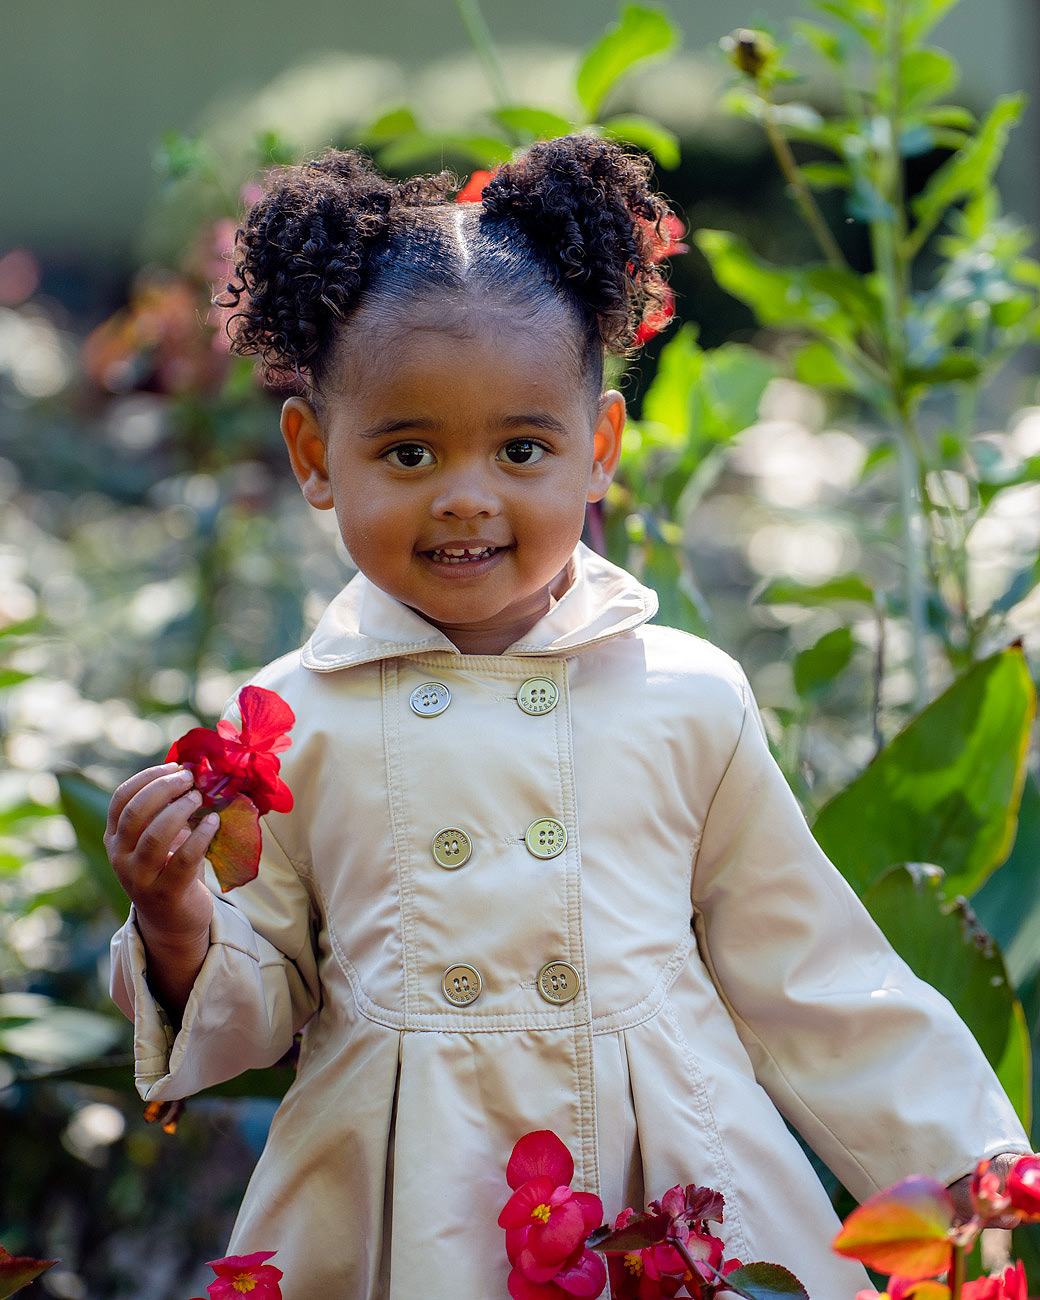 A little girl in a white coat holding a red flower.